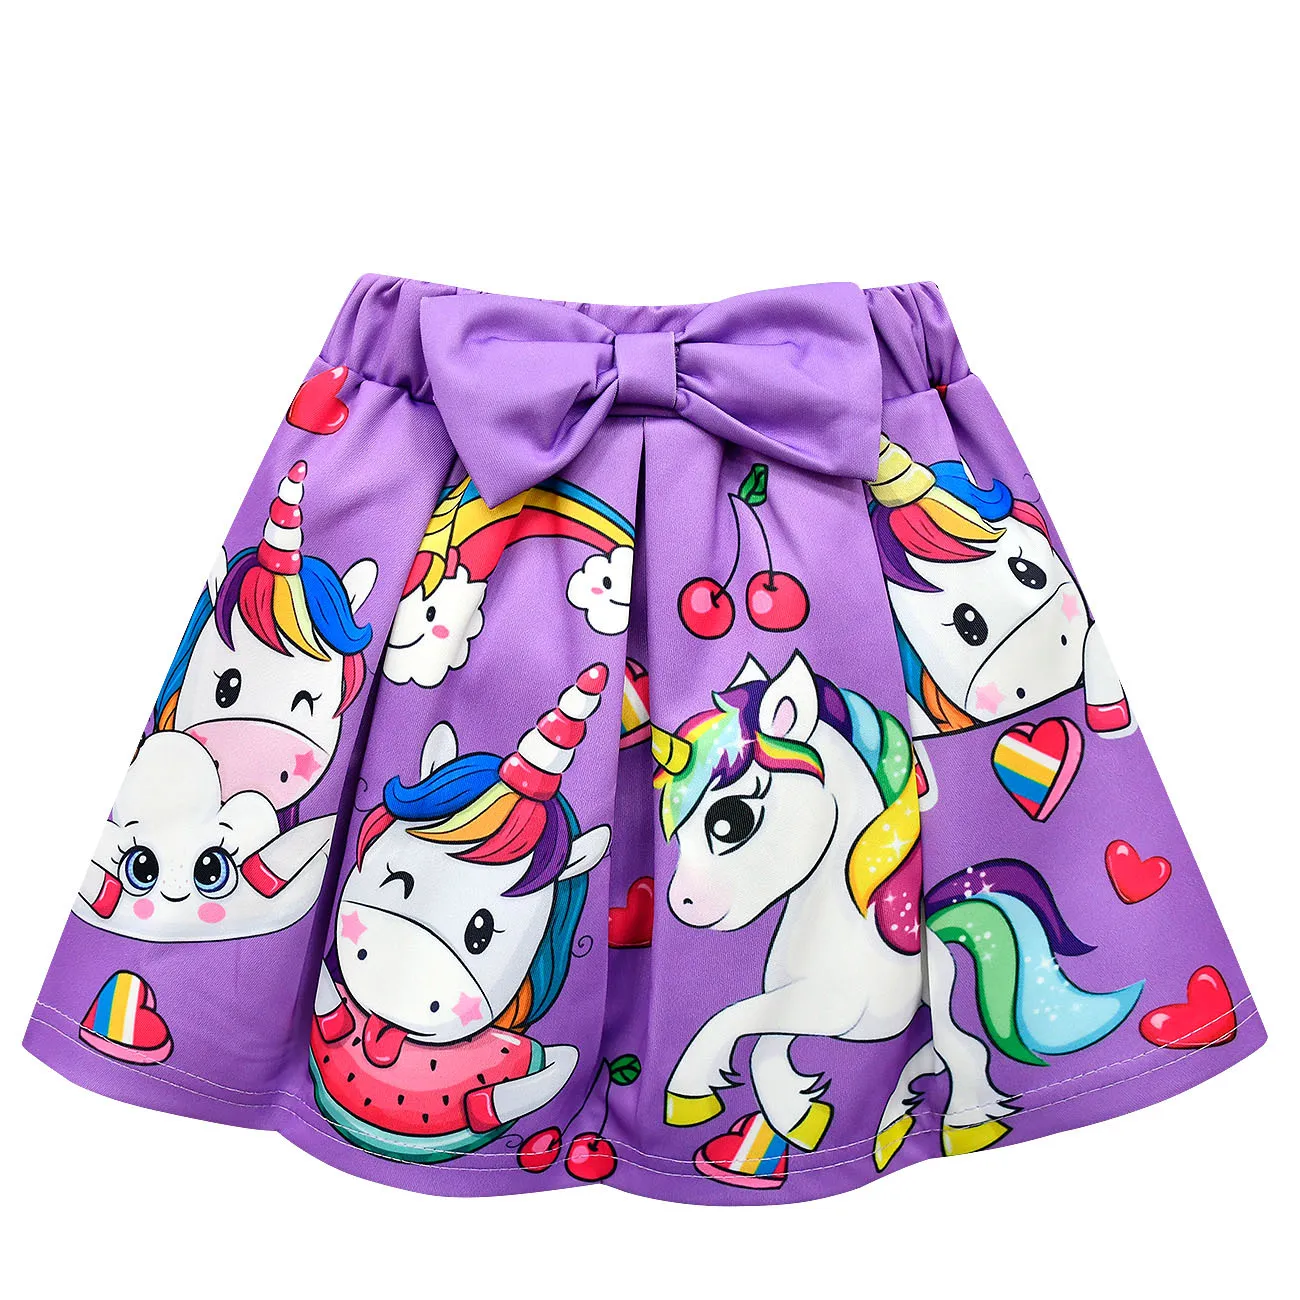 little kid suit Kids Unicorn Summer Tops Skirts Outfit Set Children Princess Party casual suit Girl Unicorn Rainbow love Clothes T-shir + Skirts newborn baby clothes set for hospital